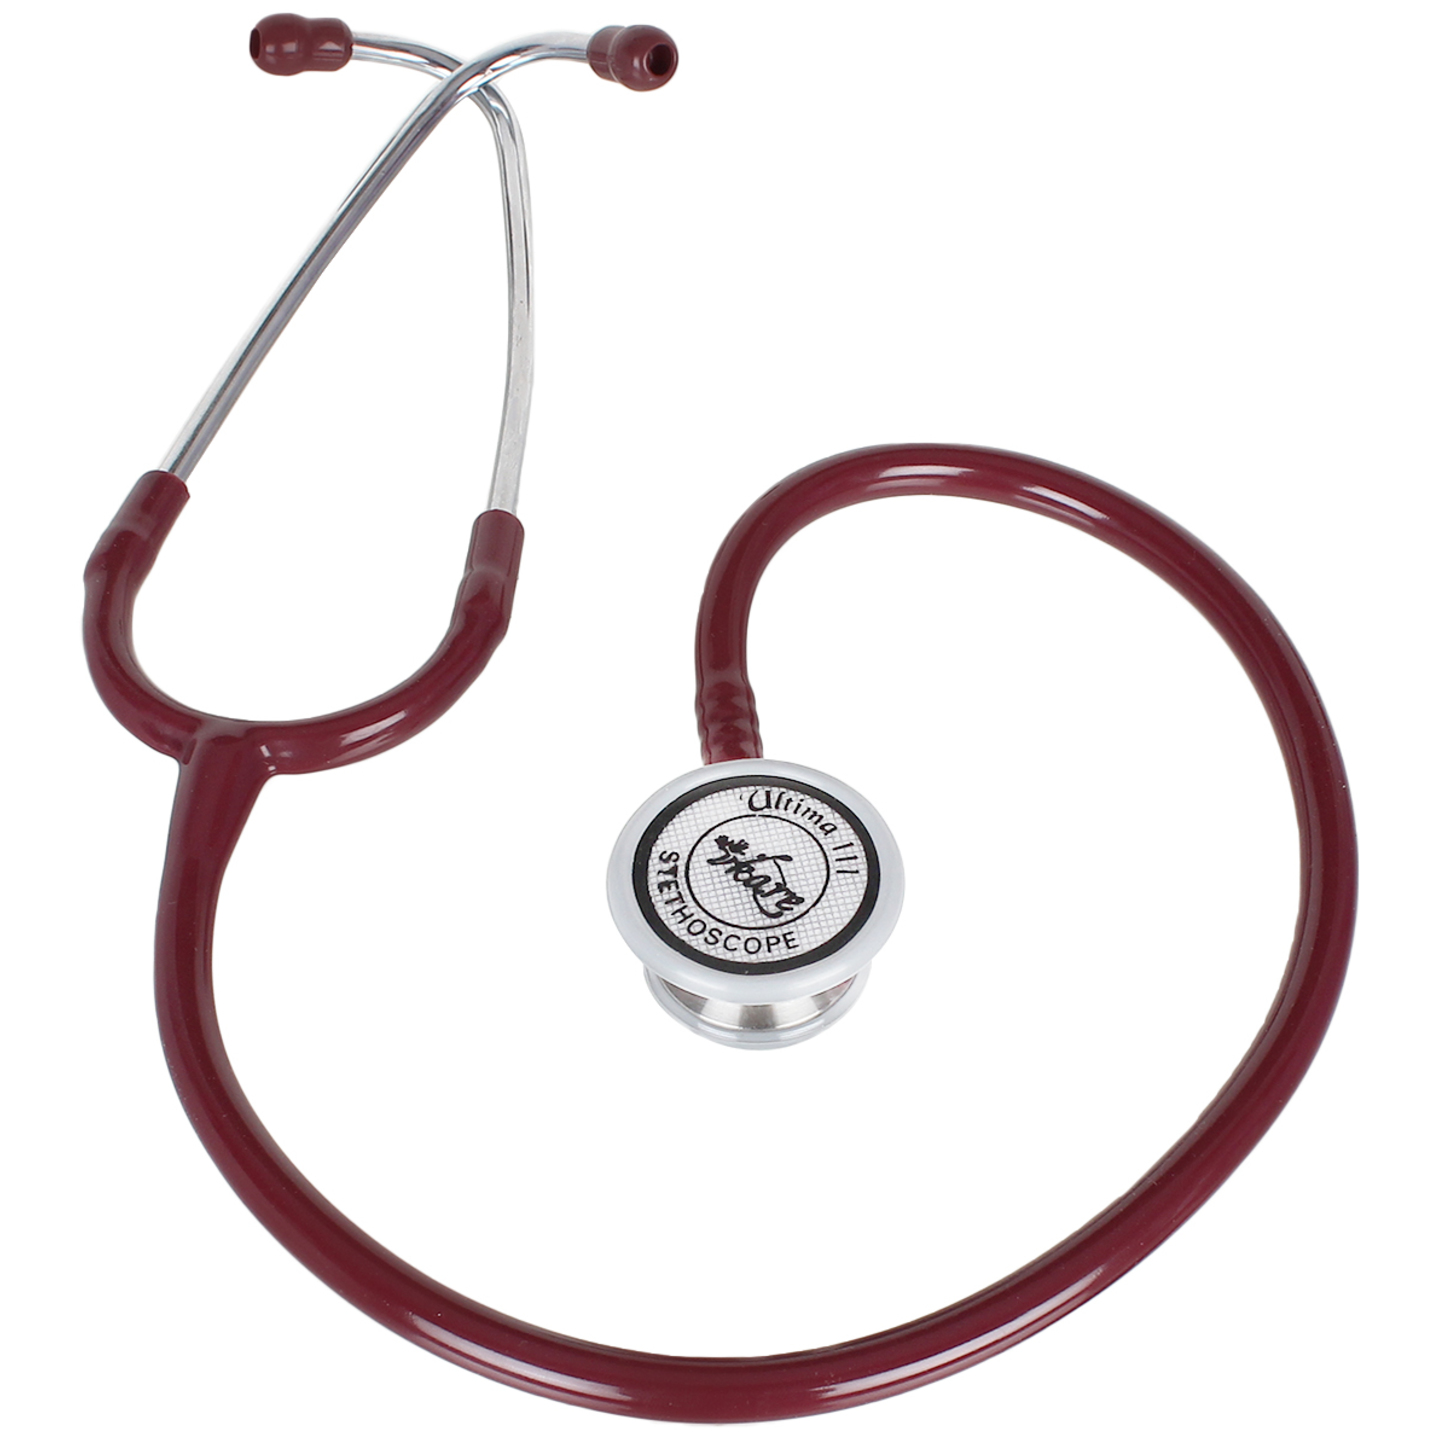 Vkare Adult Stainless Steel Stethoscope - Ultima 111